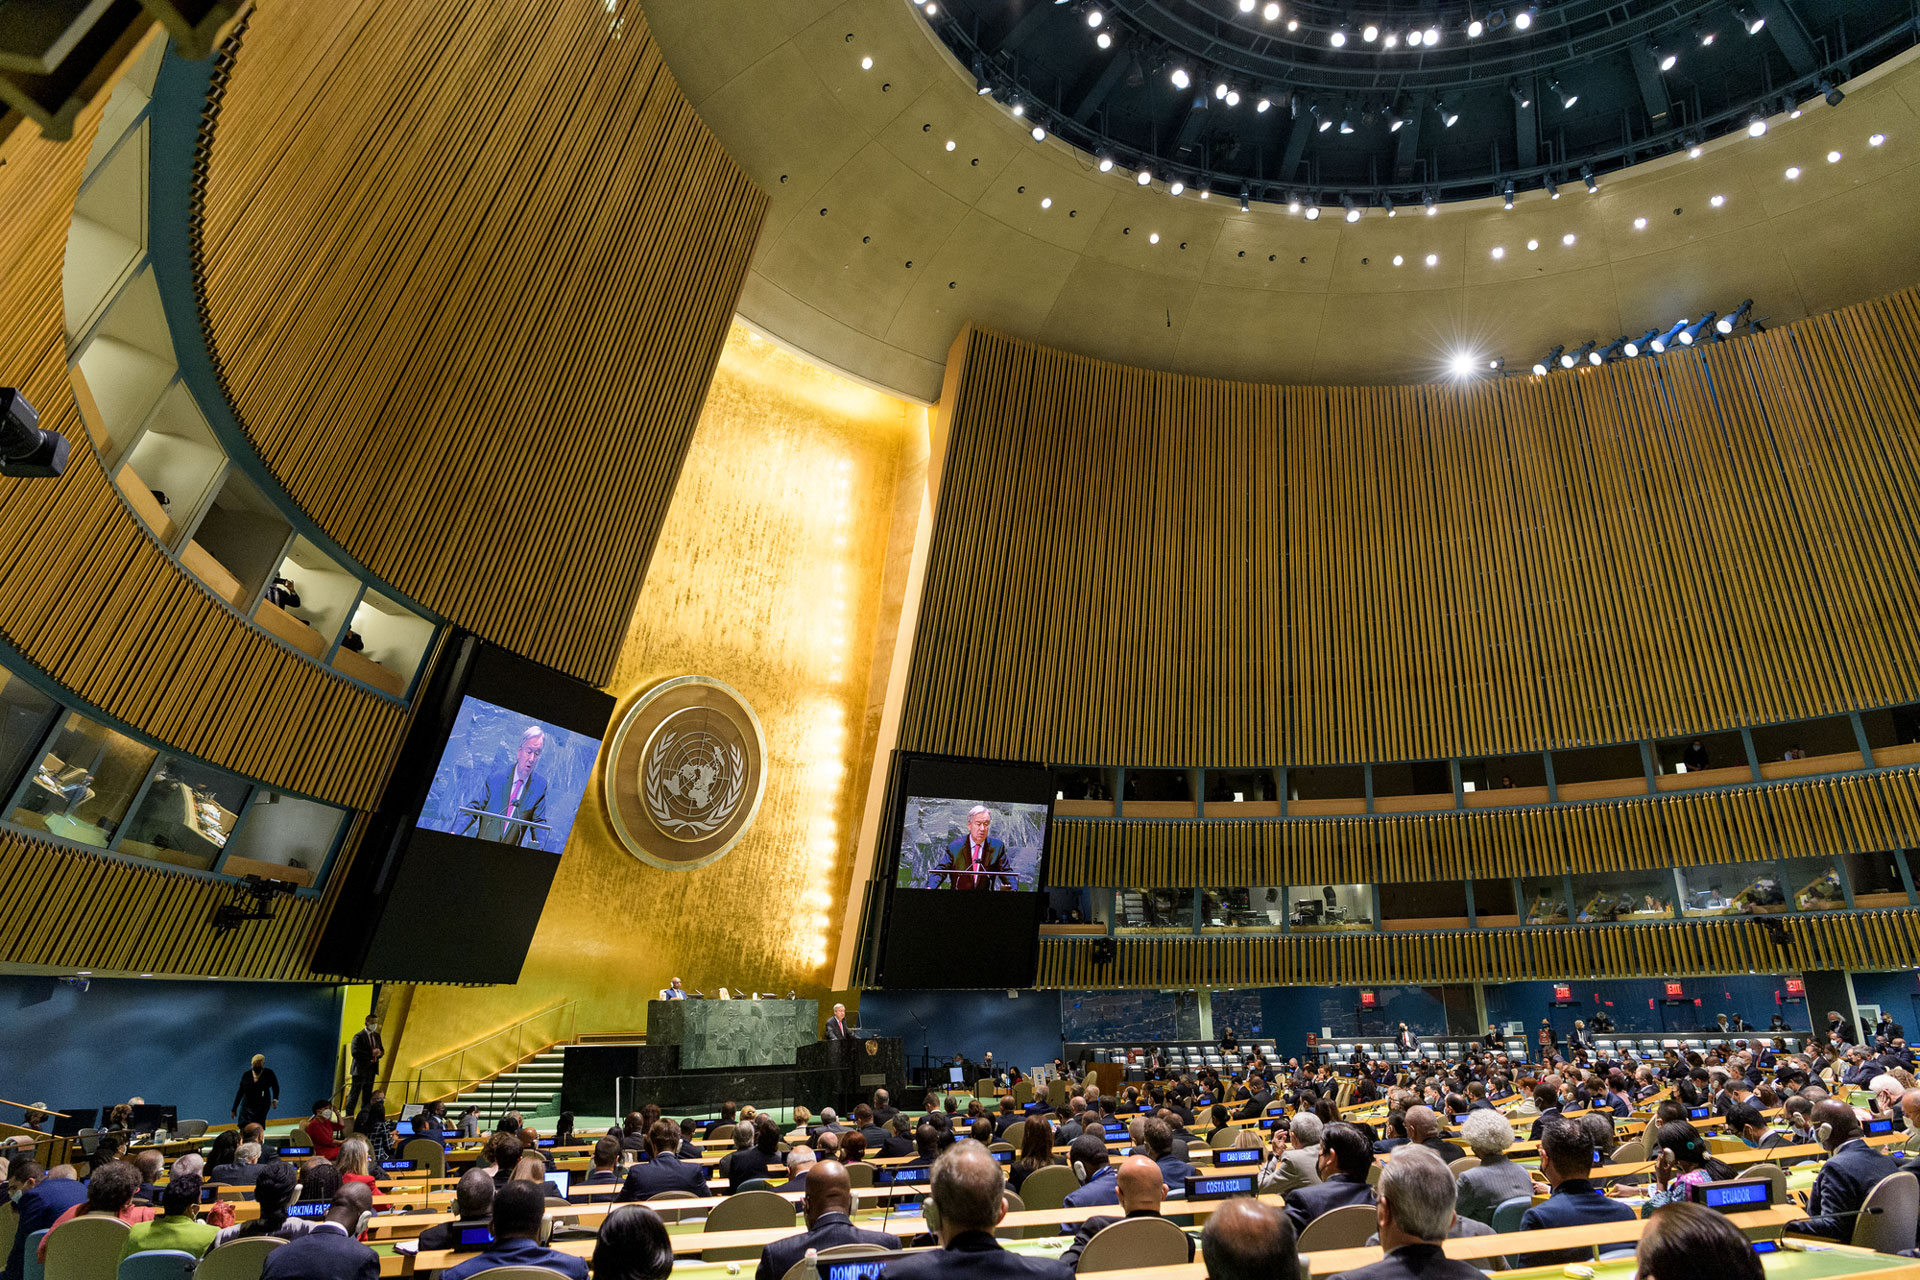 <p><sub>A wide view of the General Assembly Hall as Secretary-General António Guterres (at podium and on screens) addresses the general debate of the General Assembly’s seventy-sixth session.</sub></p>